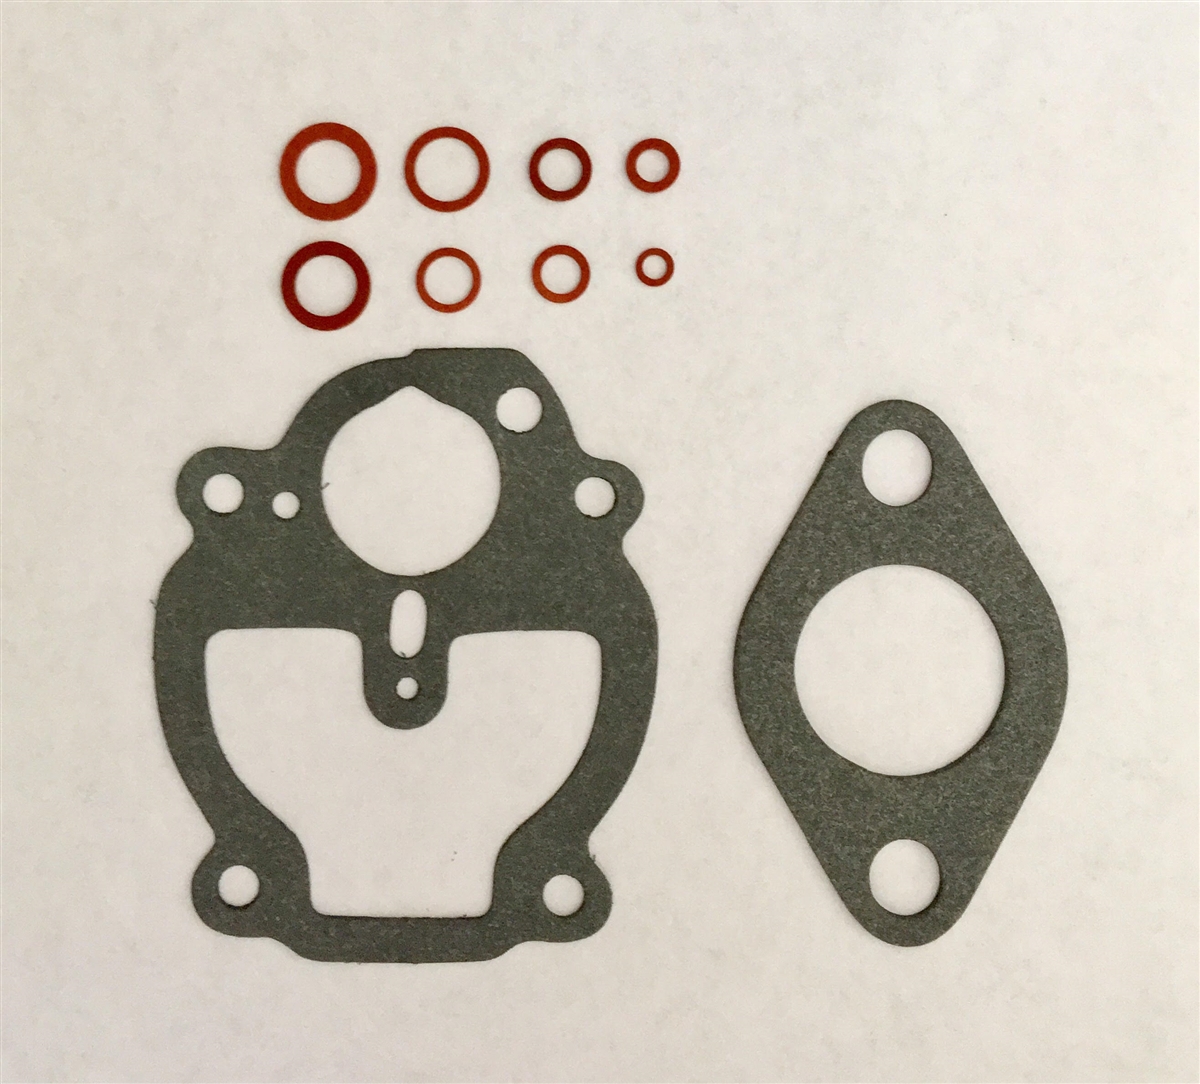 Fits L series tractors Gravely 013736 Stens Bowl Gasket